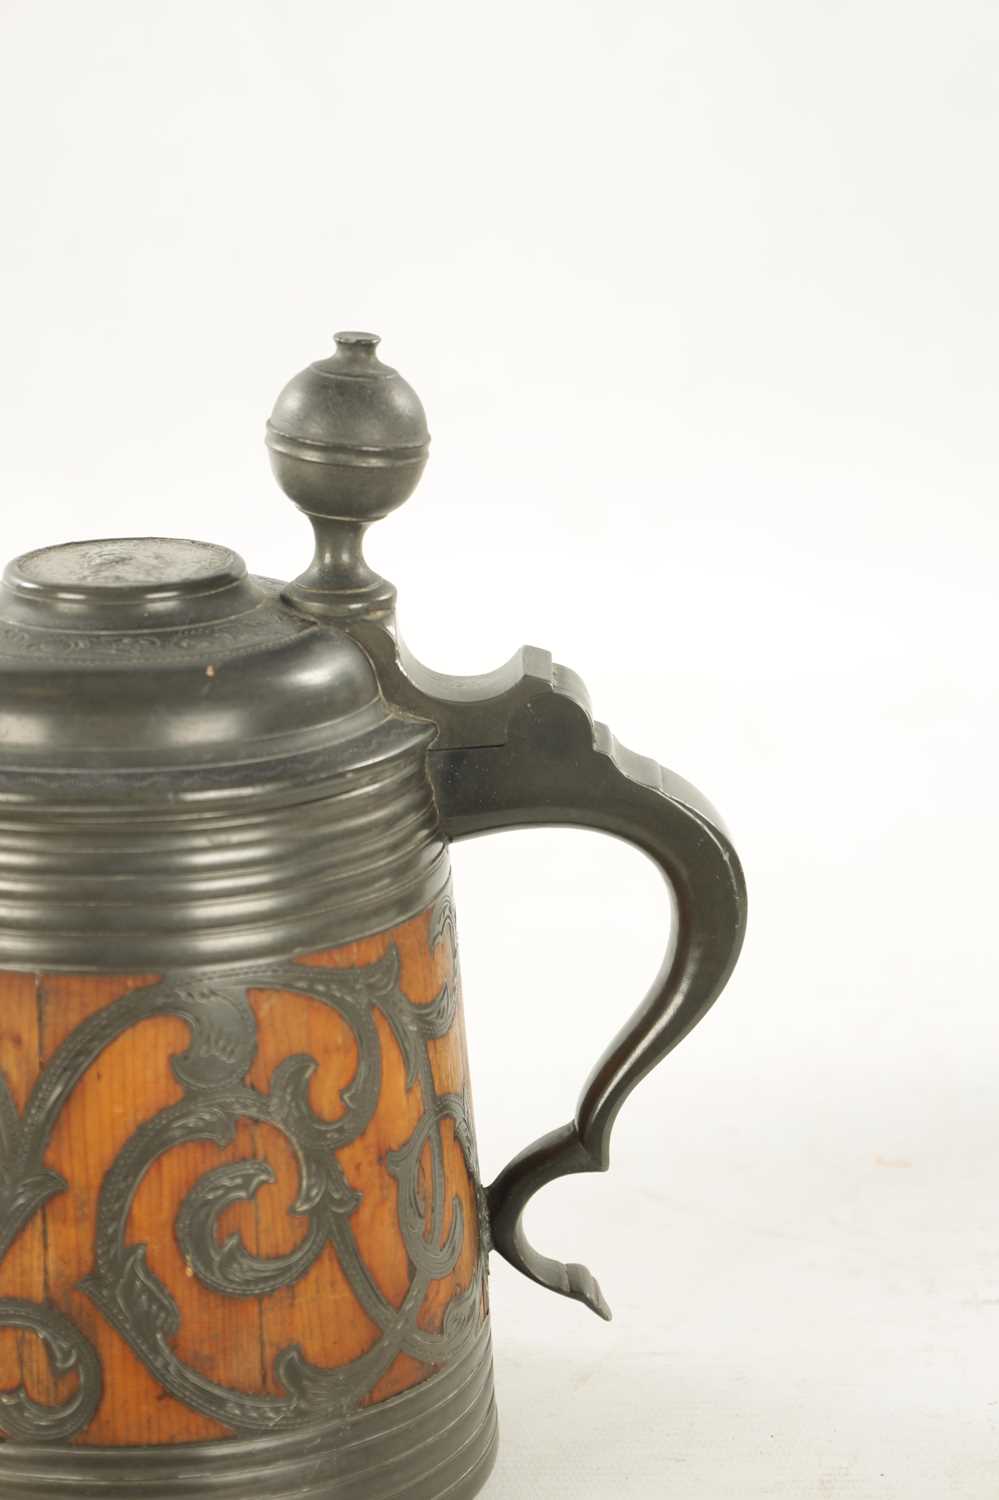 A 19TH CENTURY SWEDISH COMMEMORATIVE OAK AND PEWTER TANKARD - Image 4 of 8